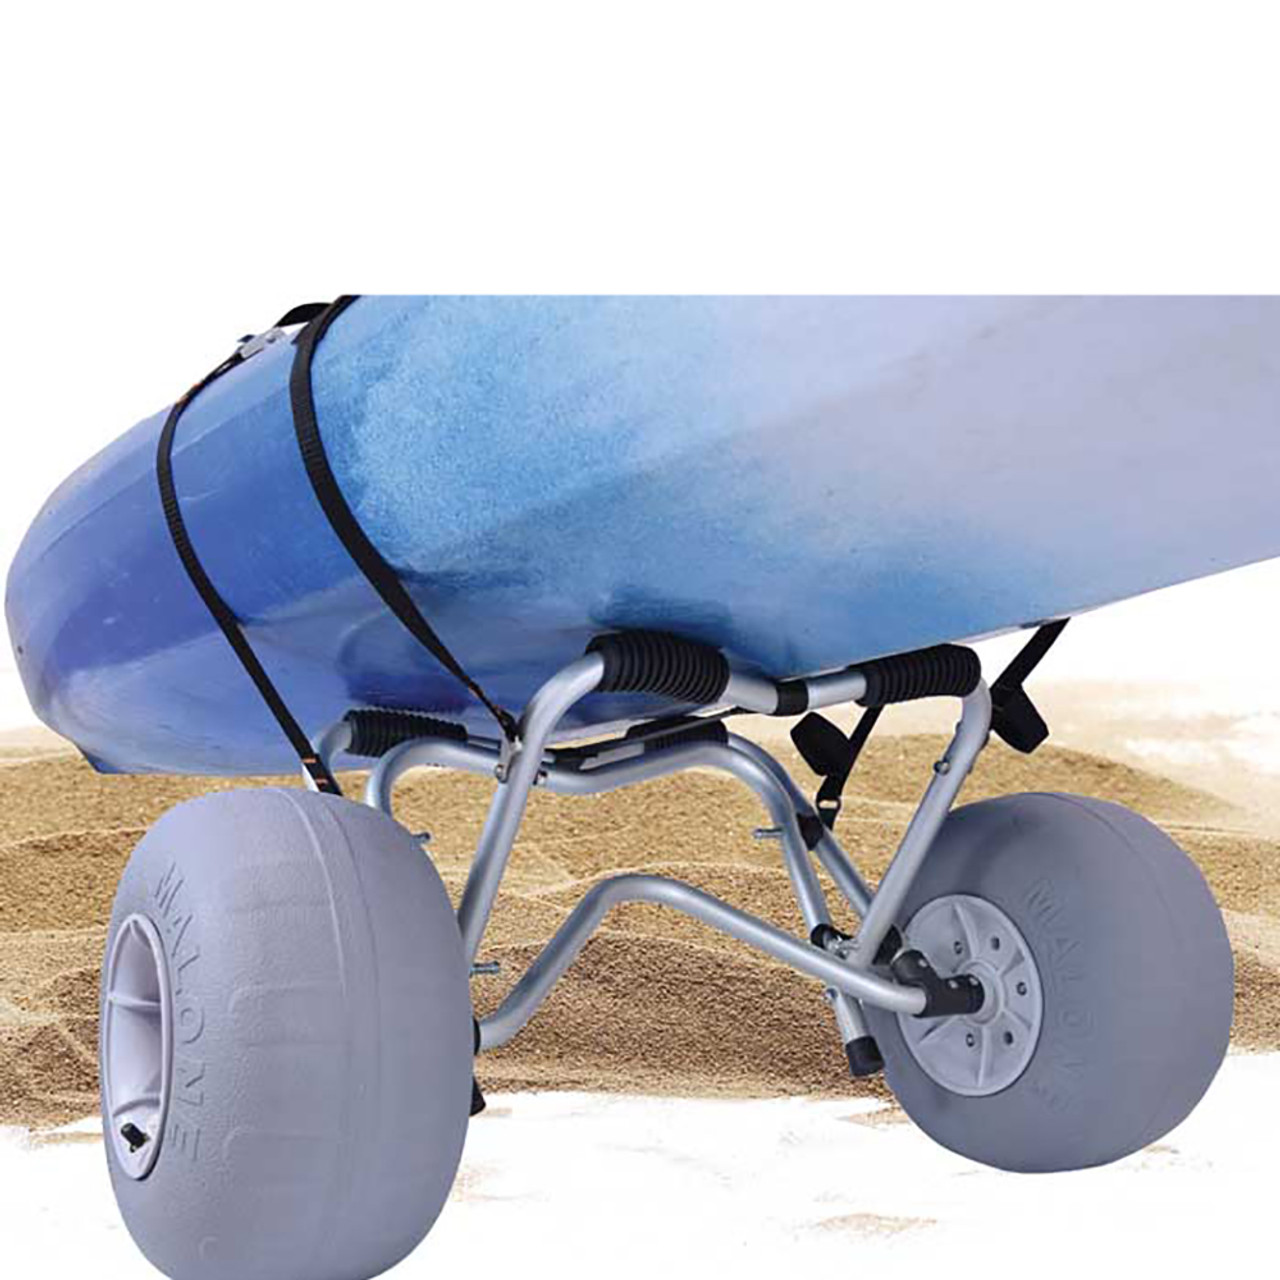 Malone Clipper TRX-S Deluxe Kayak / Canoe Cart with Balloon Beach Tires